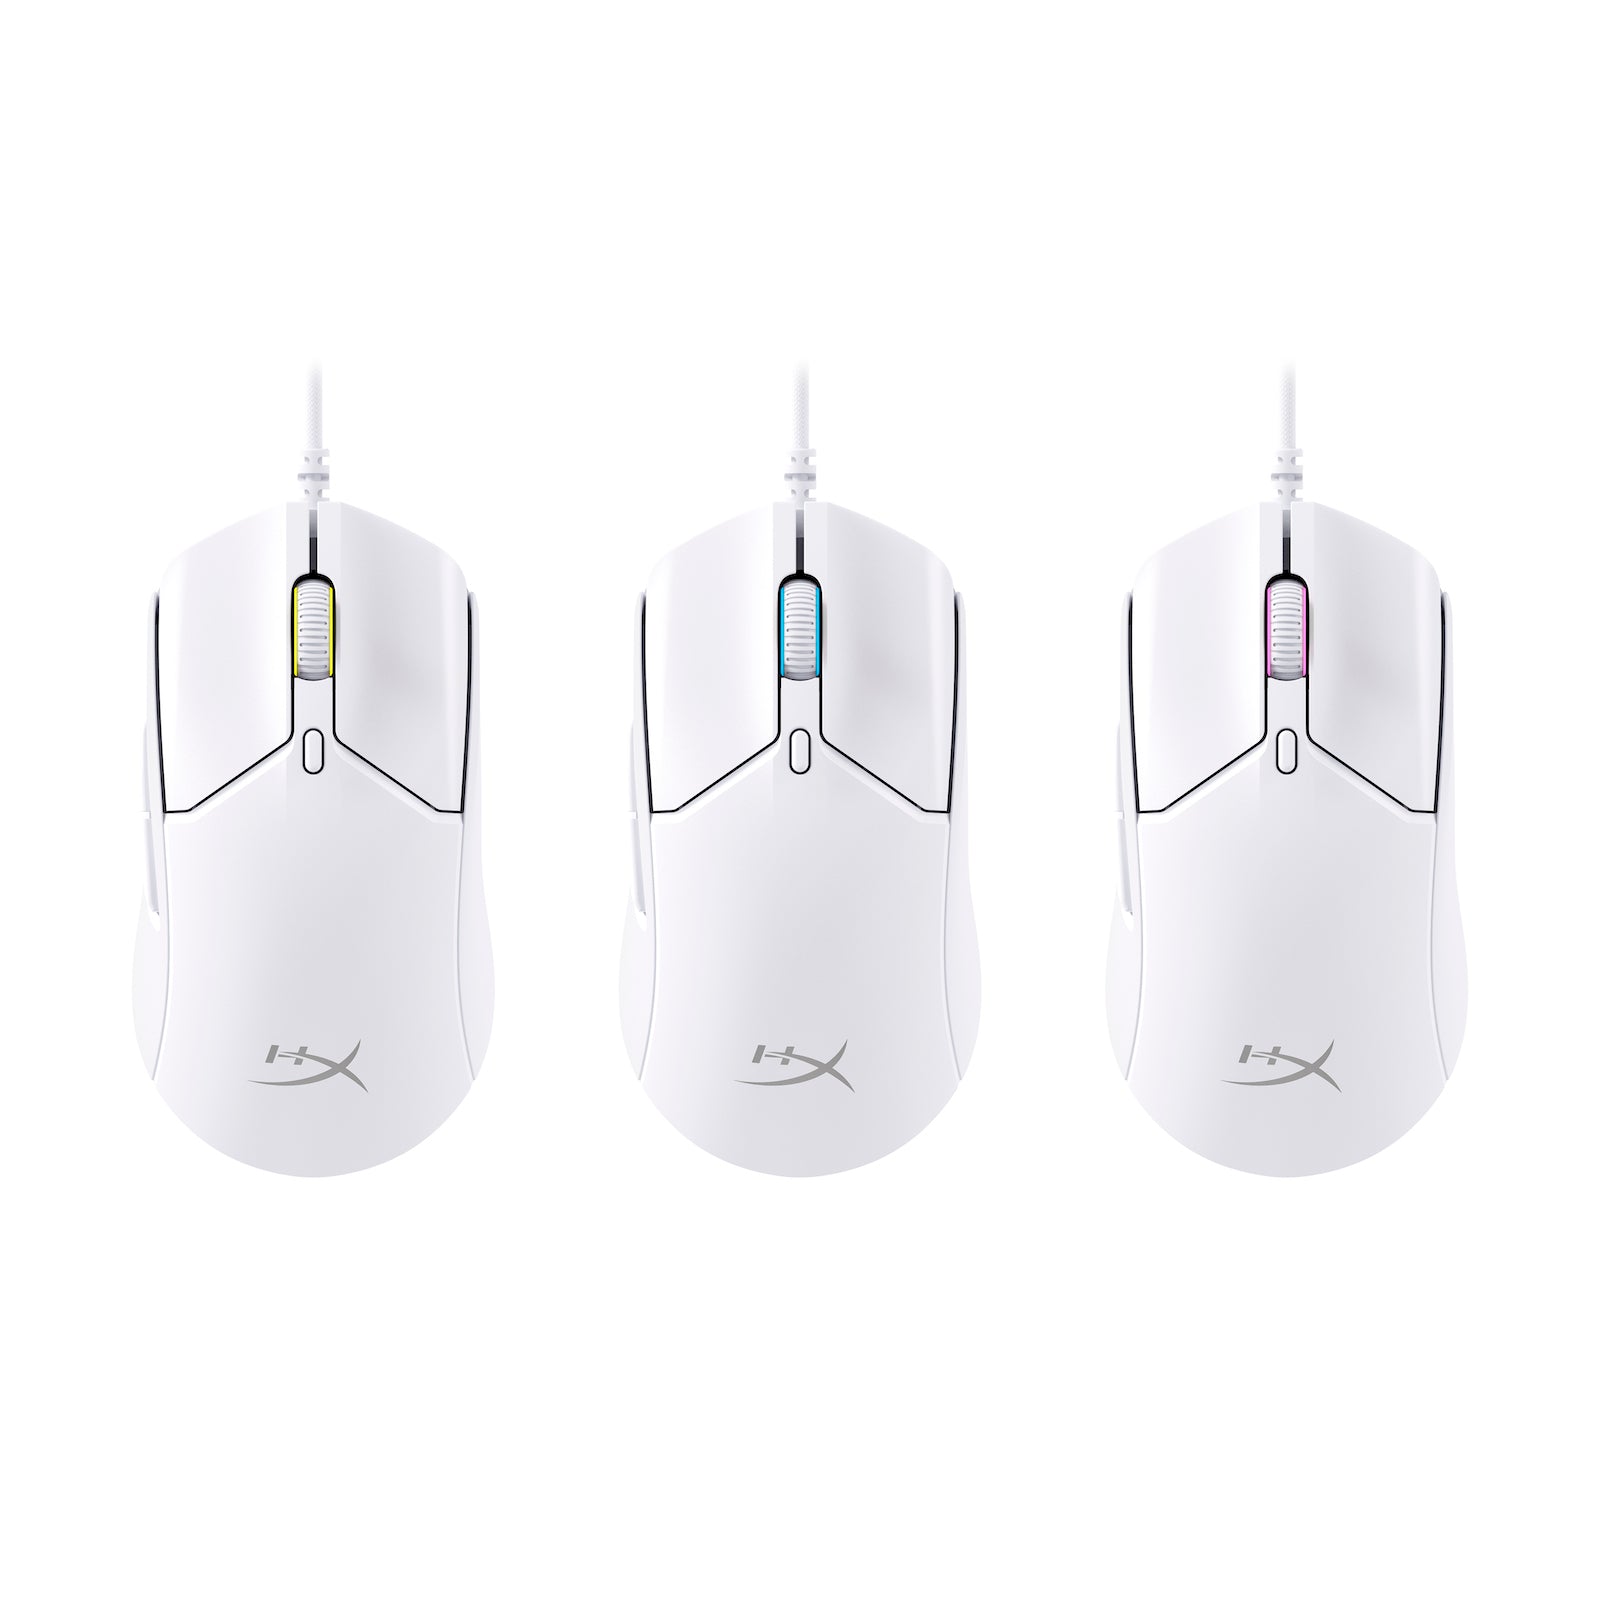 HyperX Pulsefire Haste 2 White Gaming Mouse Highlighting RGB Functions